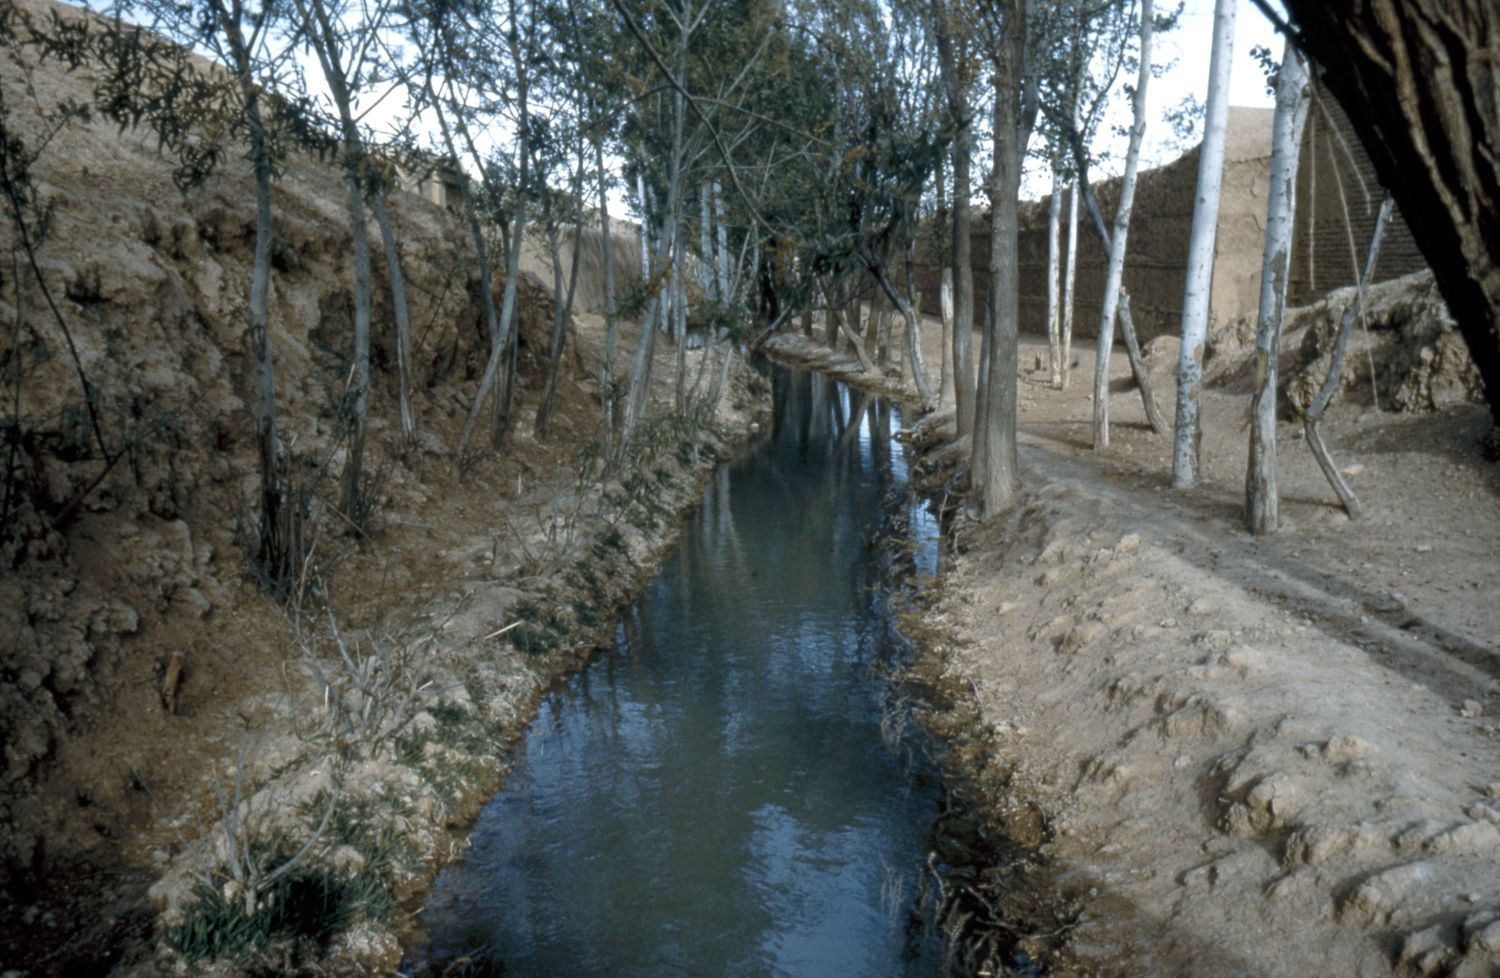 View of an irrigation channel (jub) near Isfahan, Iran.